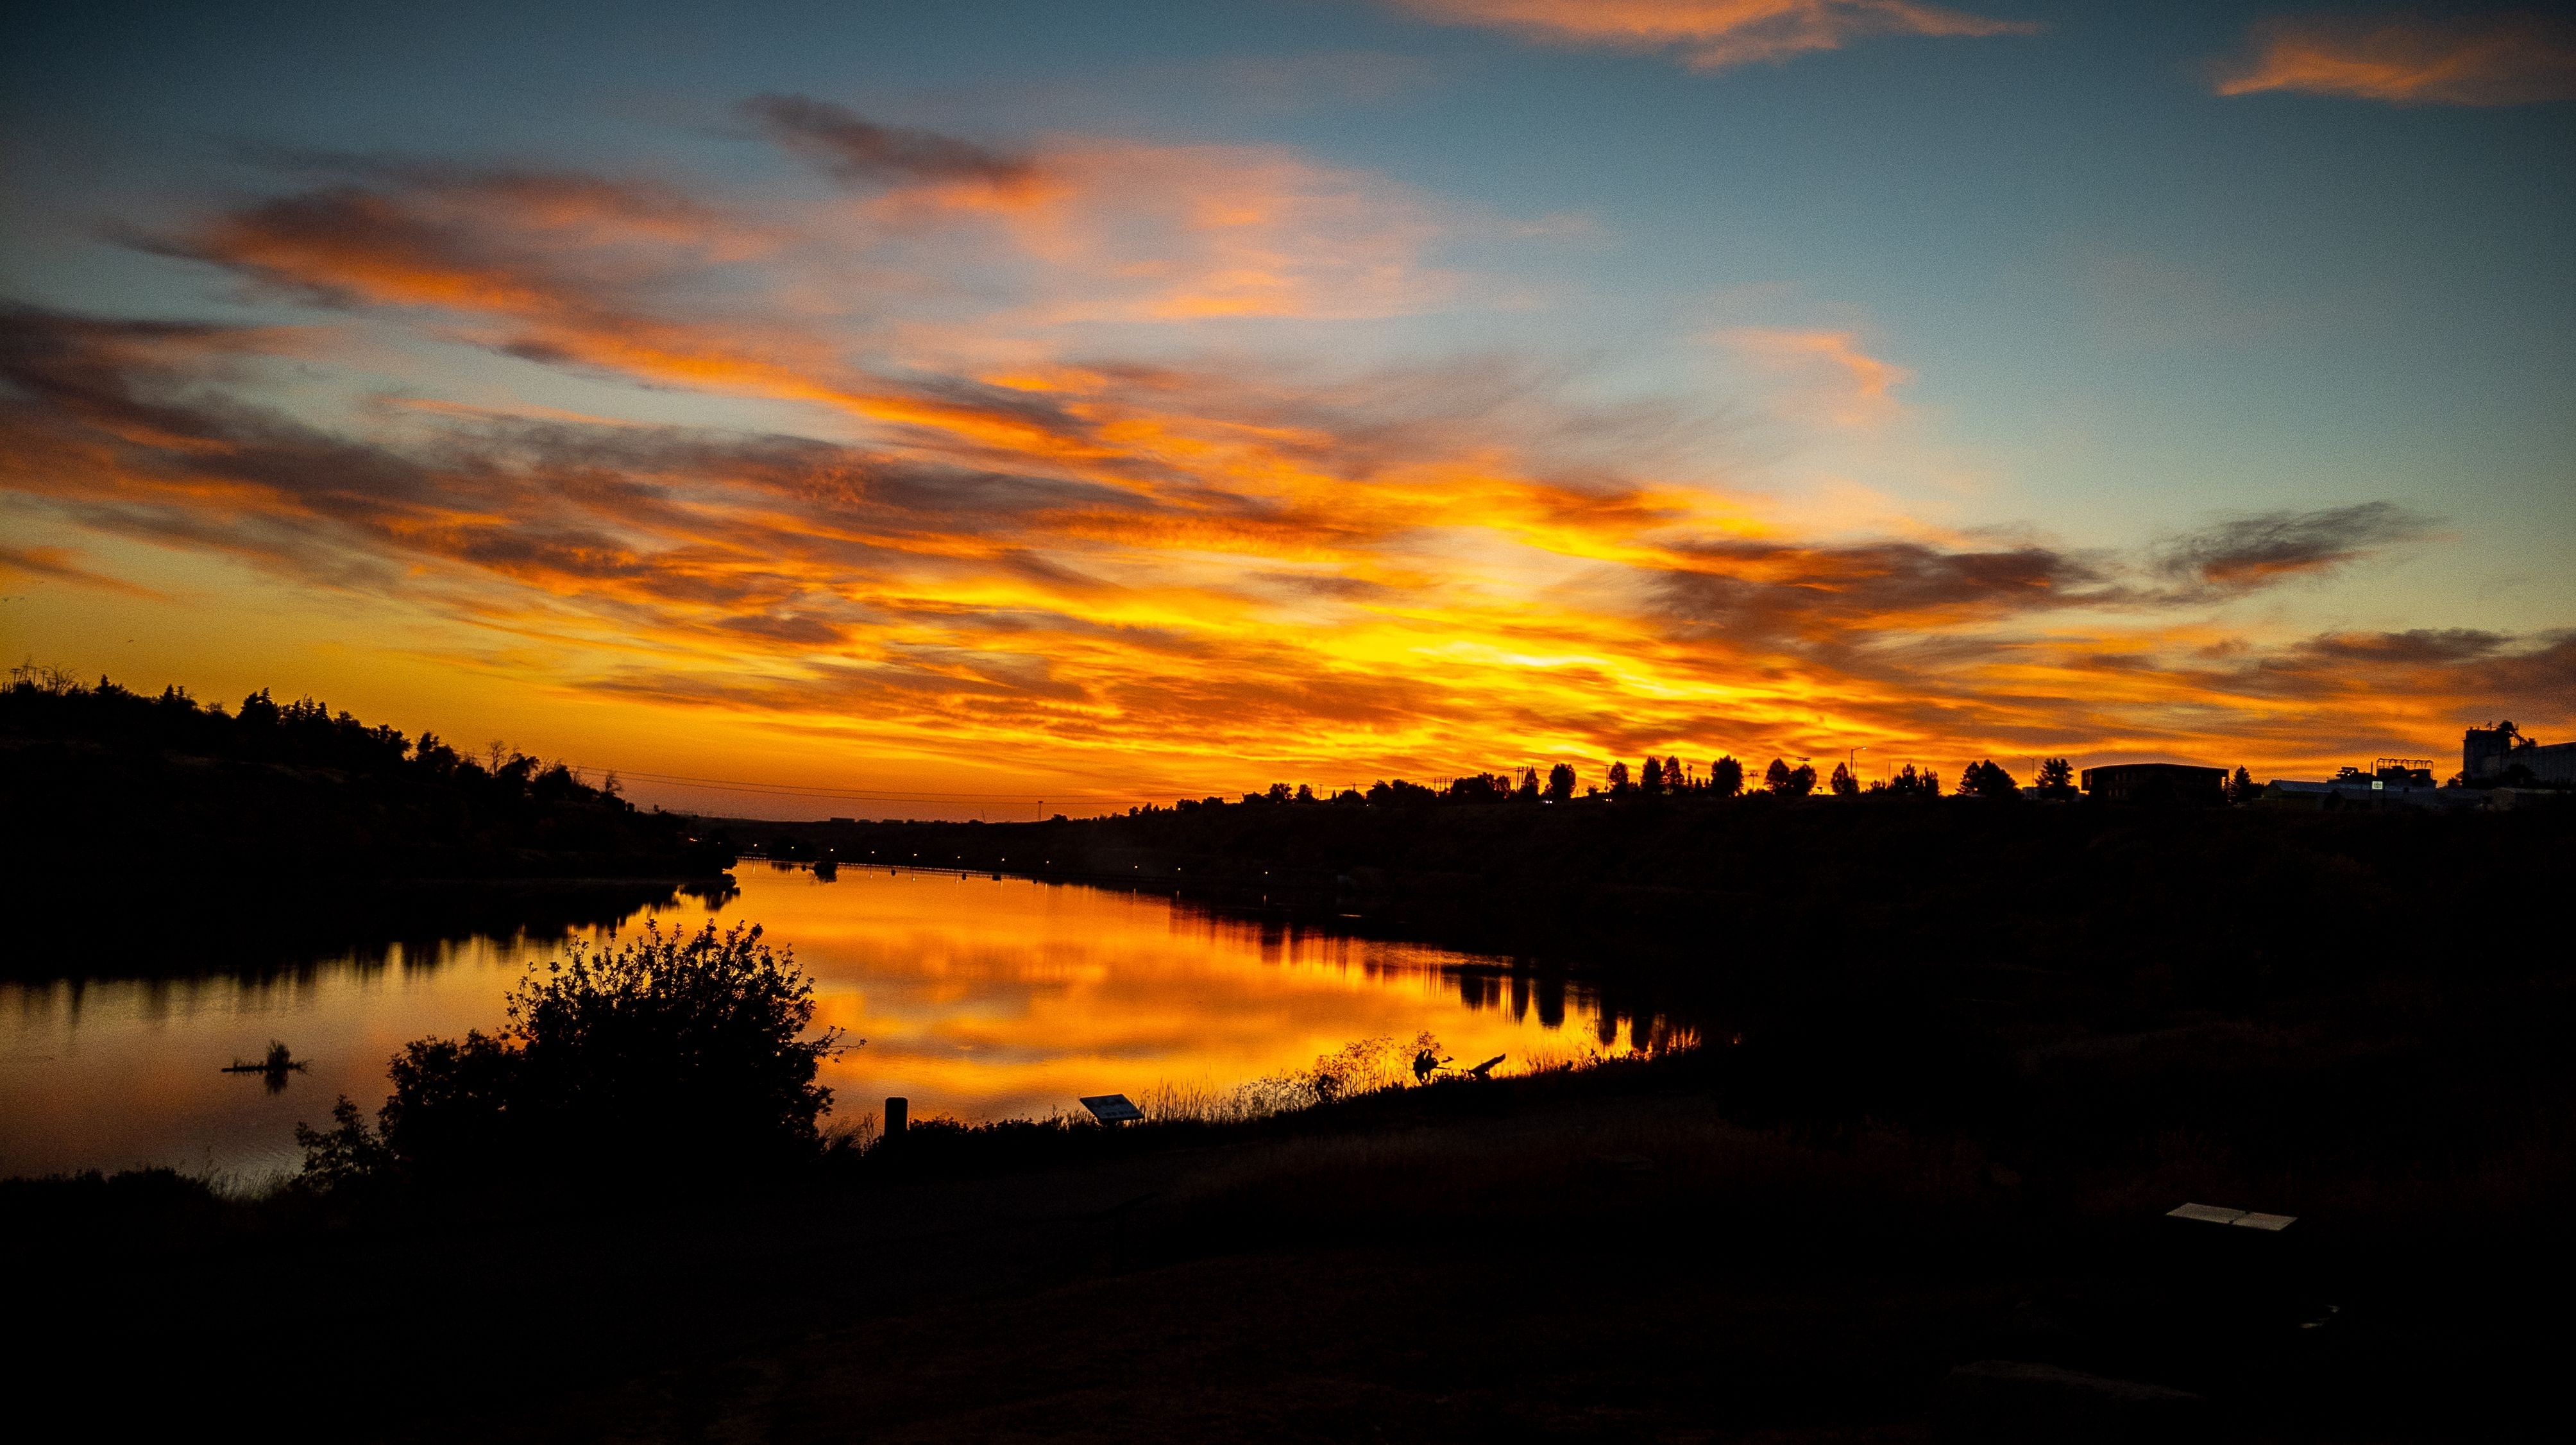 A captivating sunset over the Missouri River | Source: Shutterstock